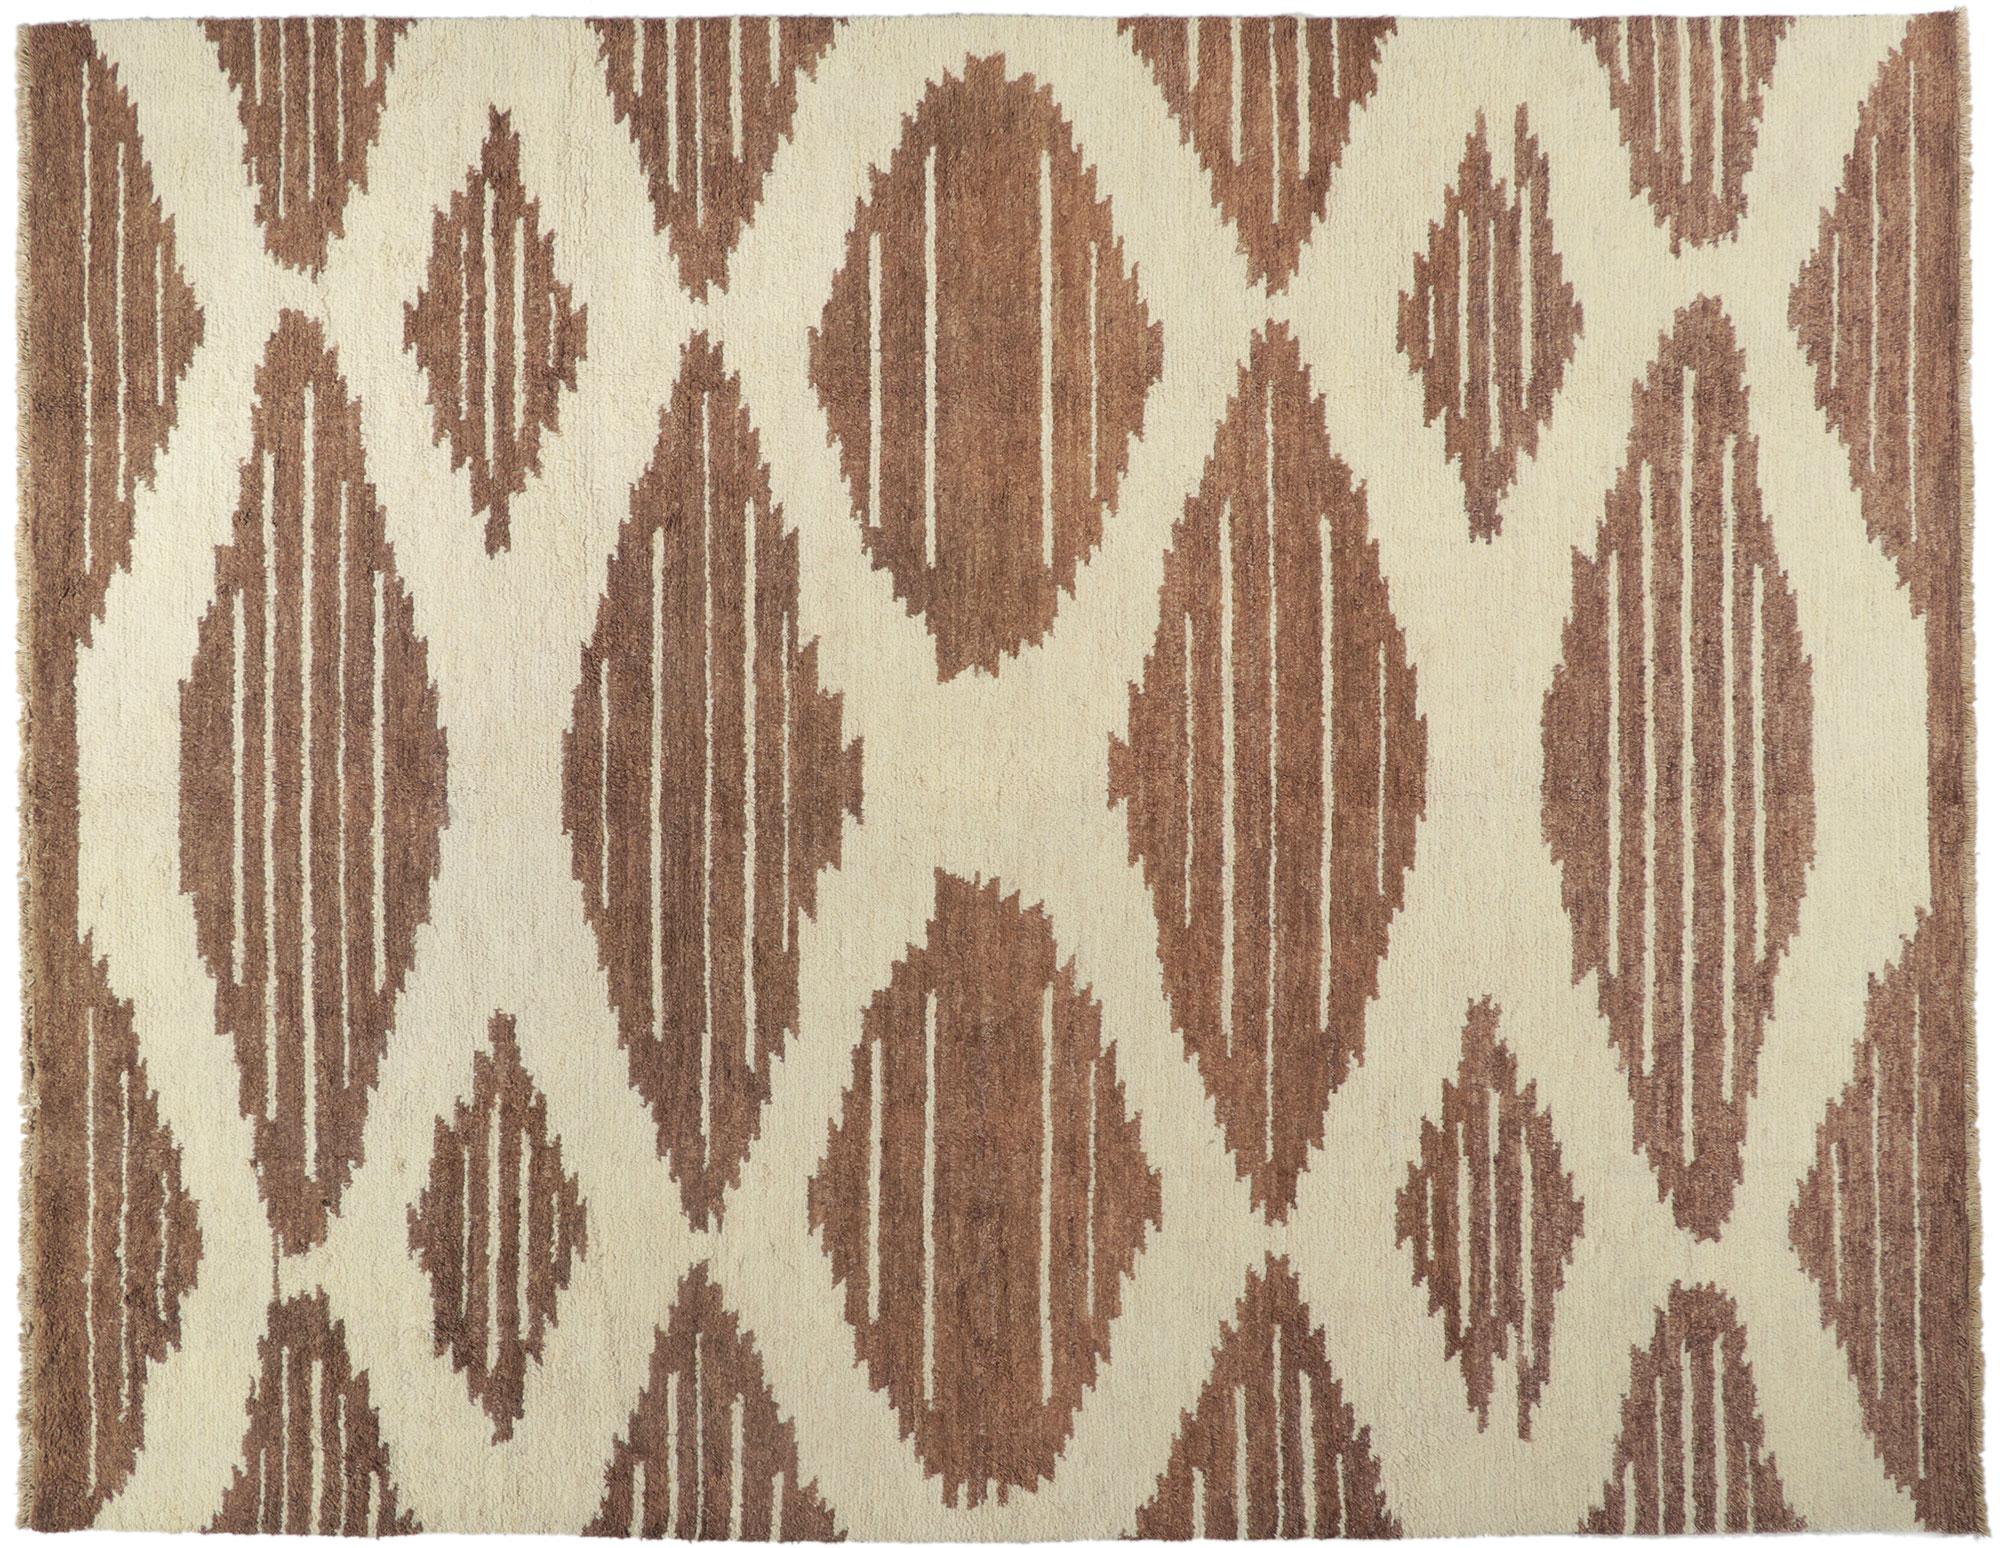 80383 New Modern Moroccan Rug, 10'04 x 13'02. Emanating nomadic charm with incredible detail and texture, this hand knotted wool Moroccan area rug is a captivating vision of woven beauty. The Navajo design and earthy colorway woven into this piece